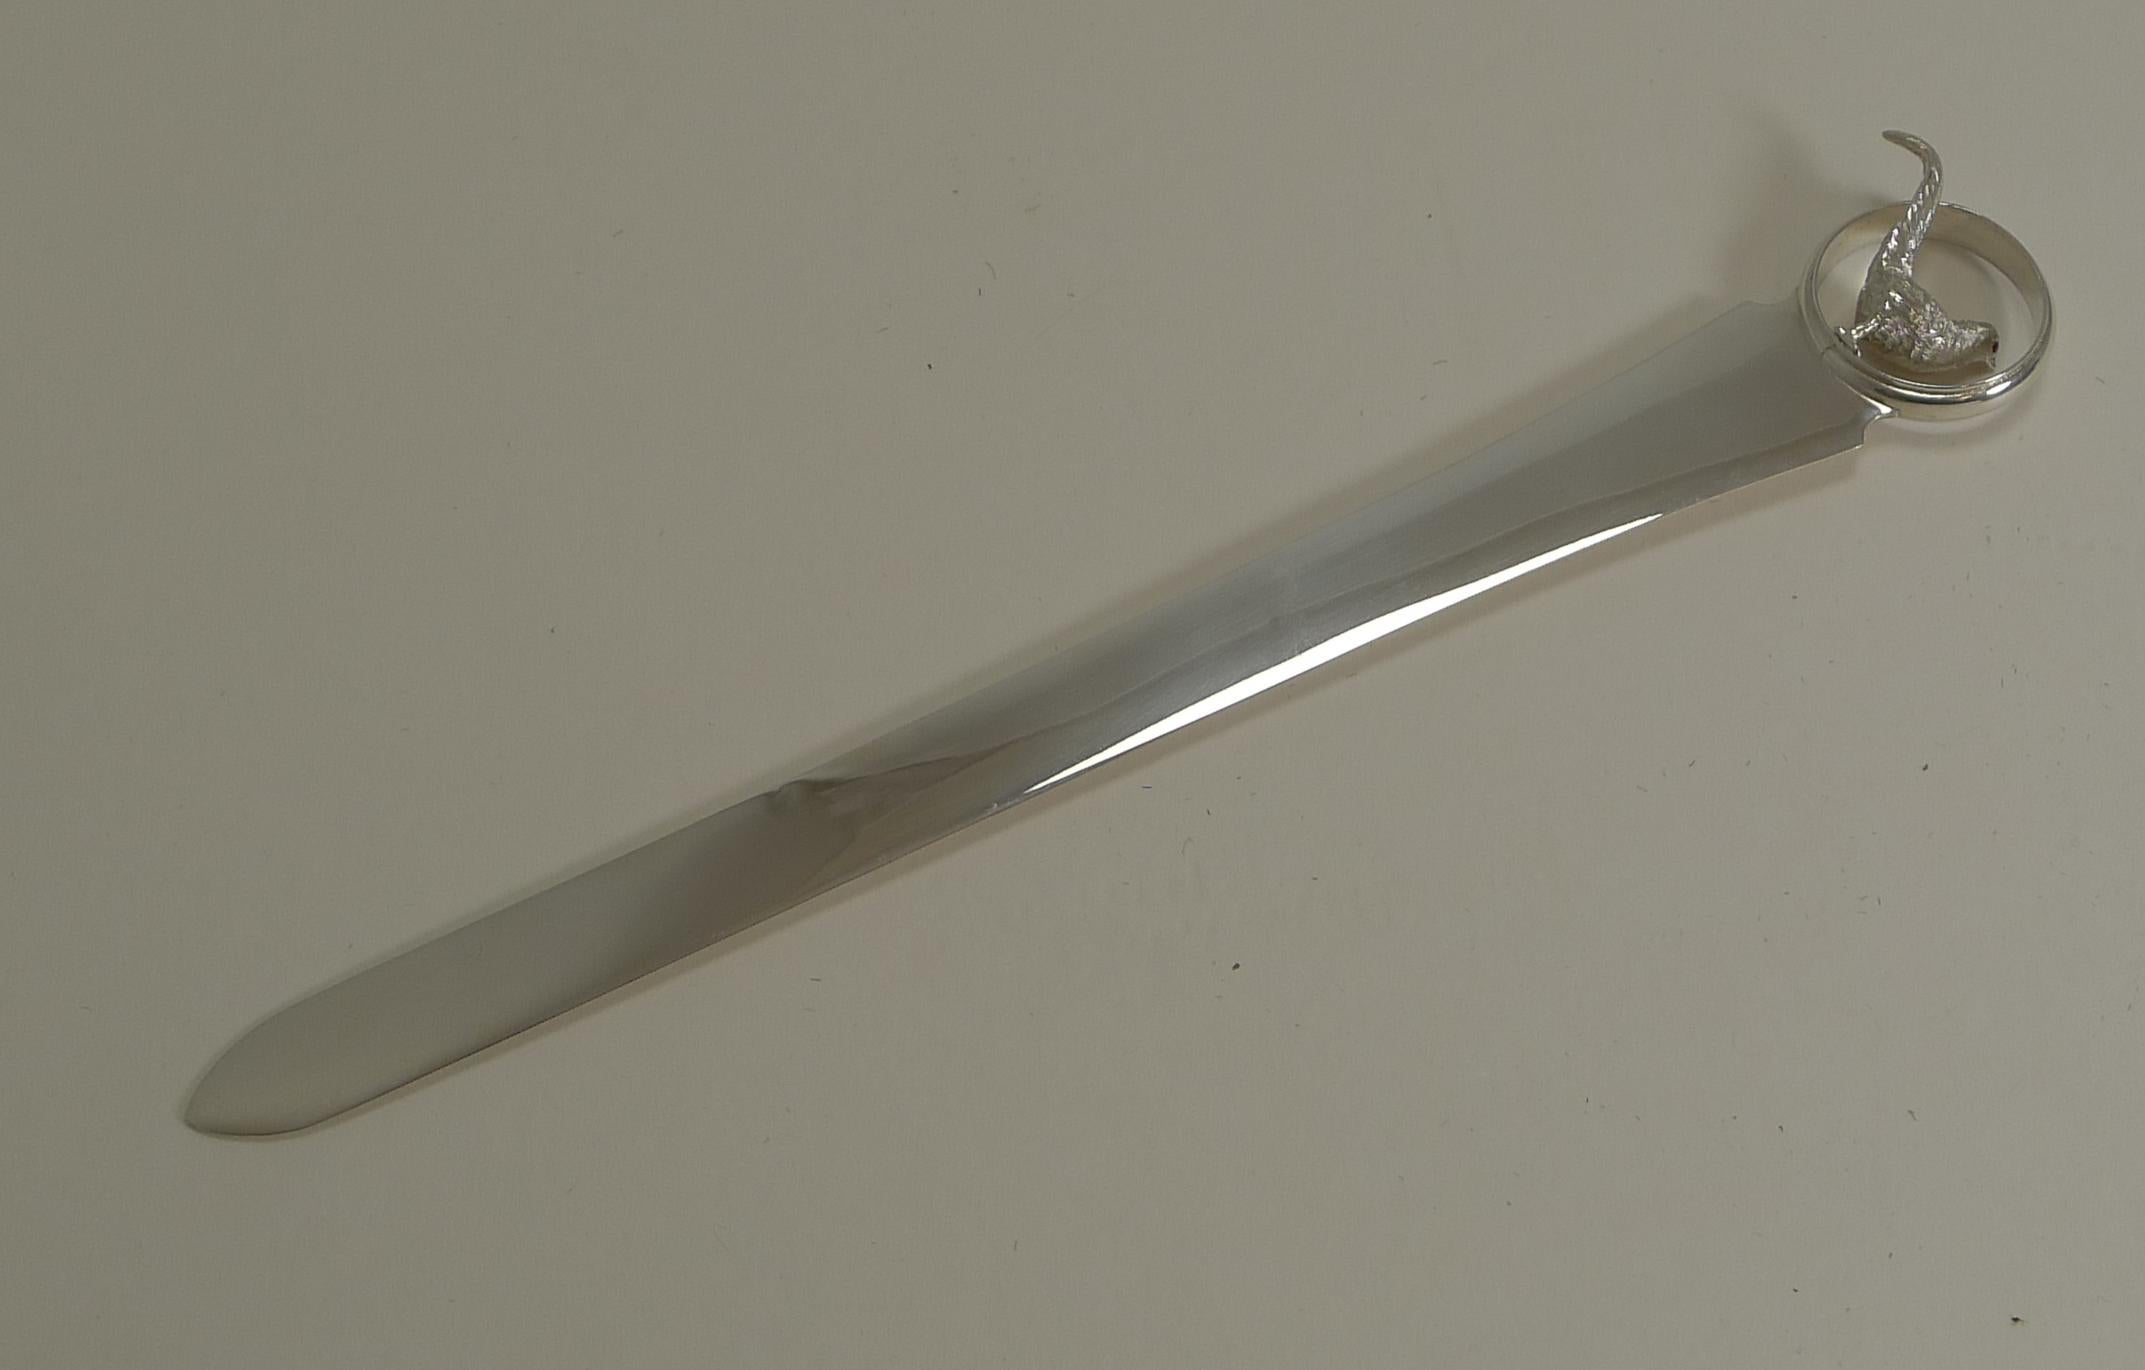 A handsome Edwardian figural letter opener made from a good gauge of English sterling hallmarked for London, 1908.

Of course what makes this a scarce and outstanding example is the circular terminal sporting a wonderful Pheasant with two glass